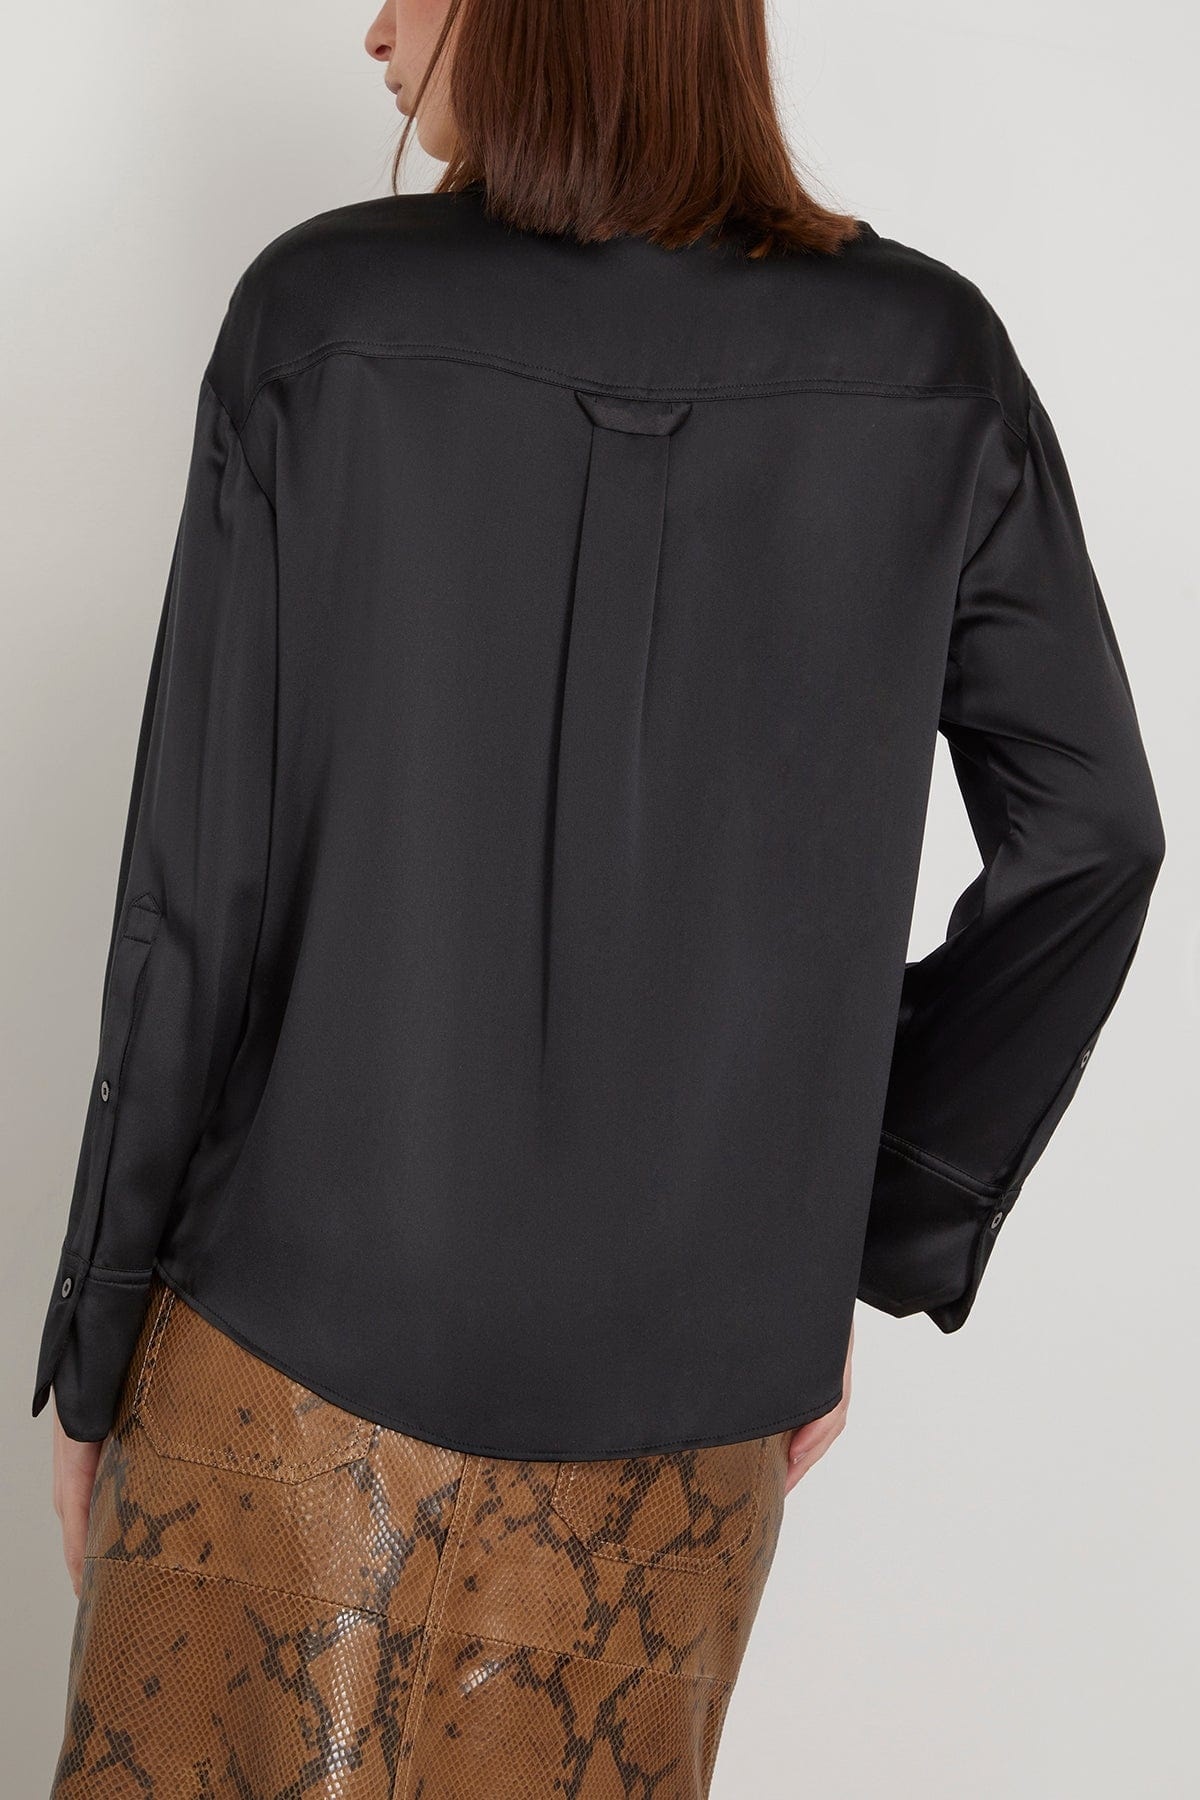 Shiny Statement Casual Shirt in Pure Black - 4